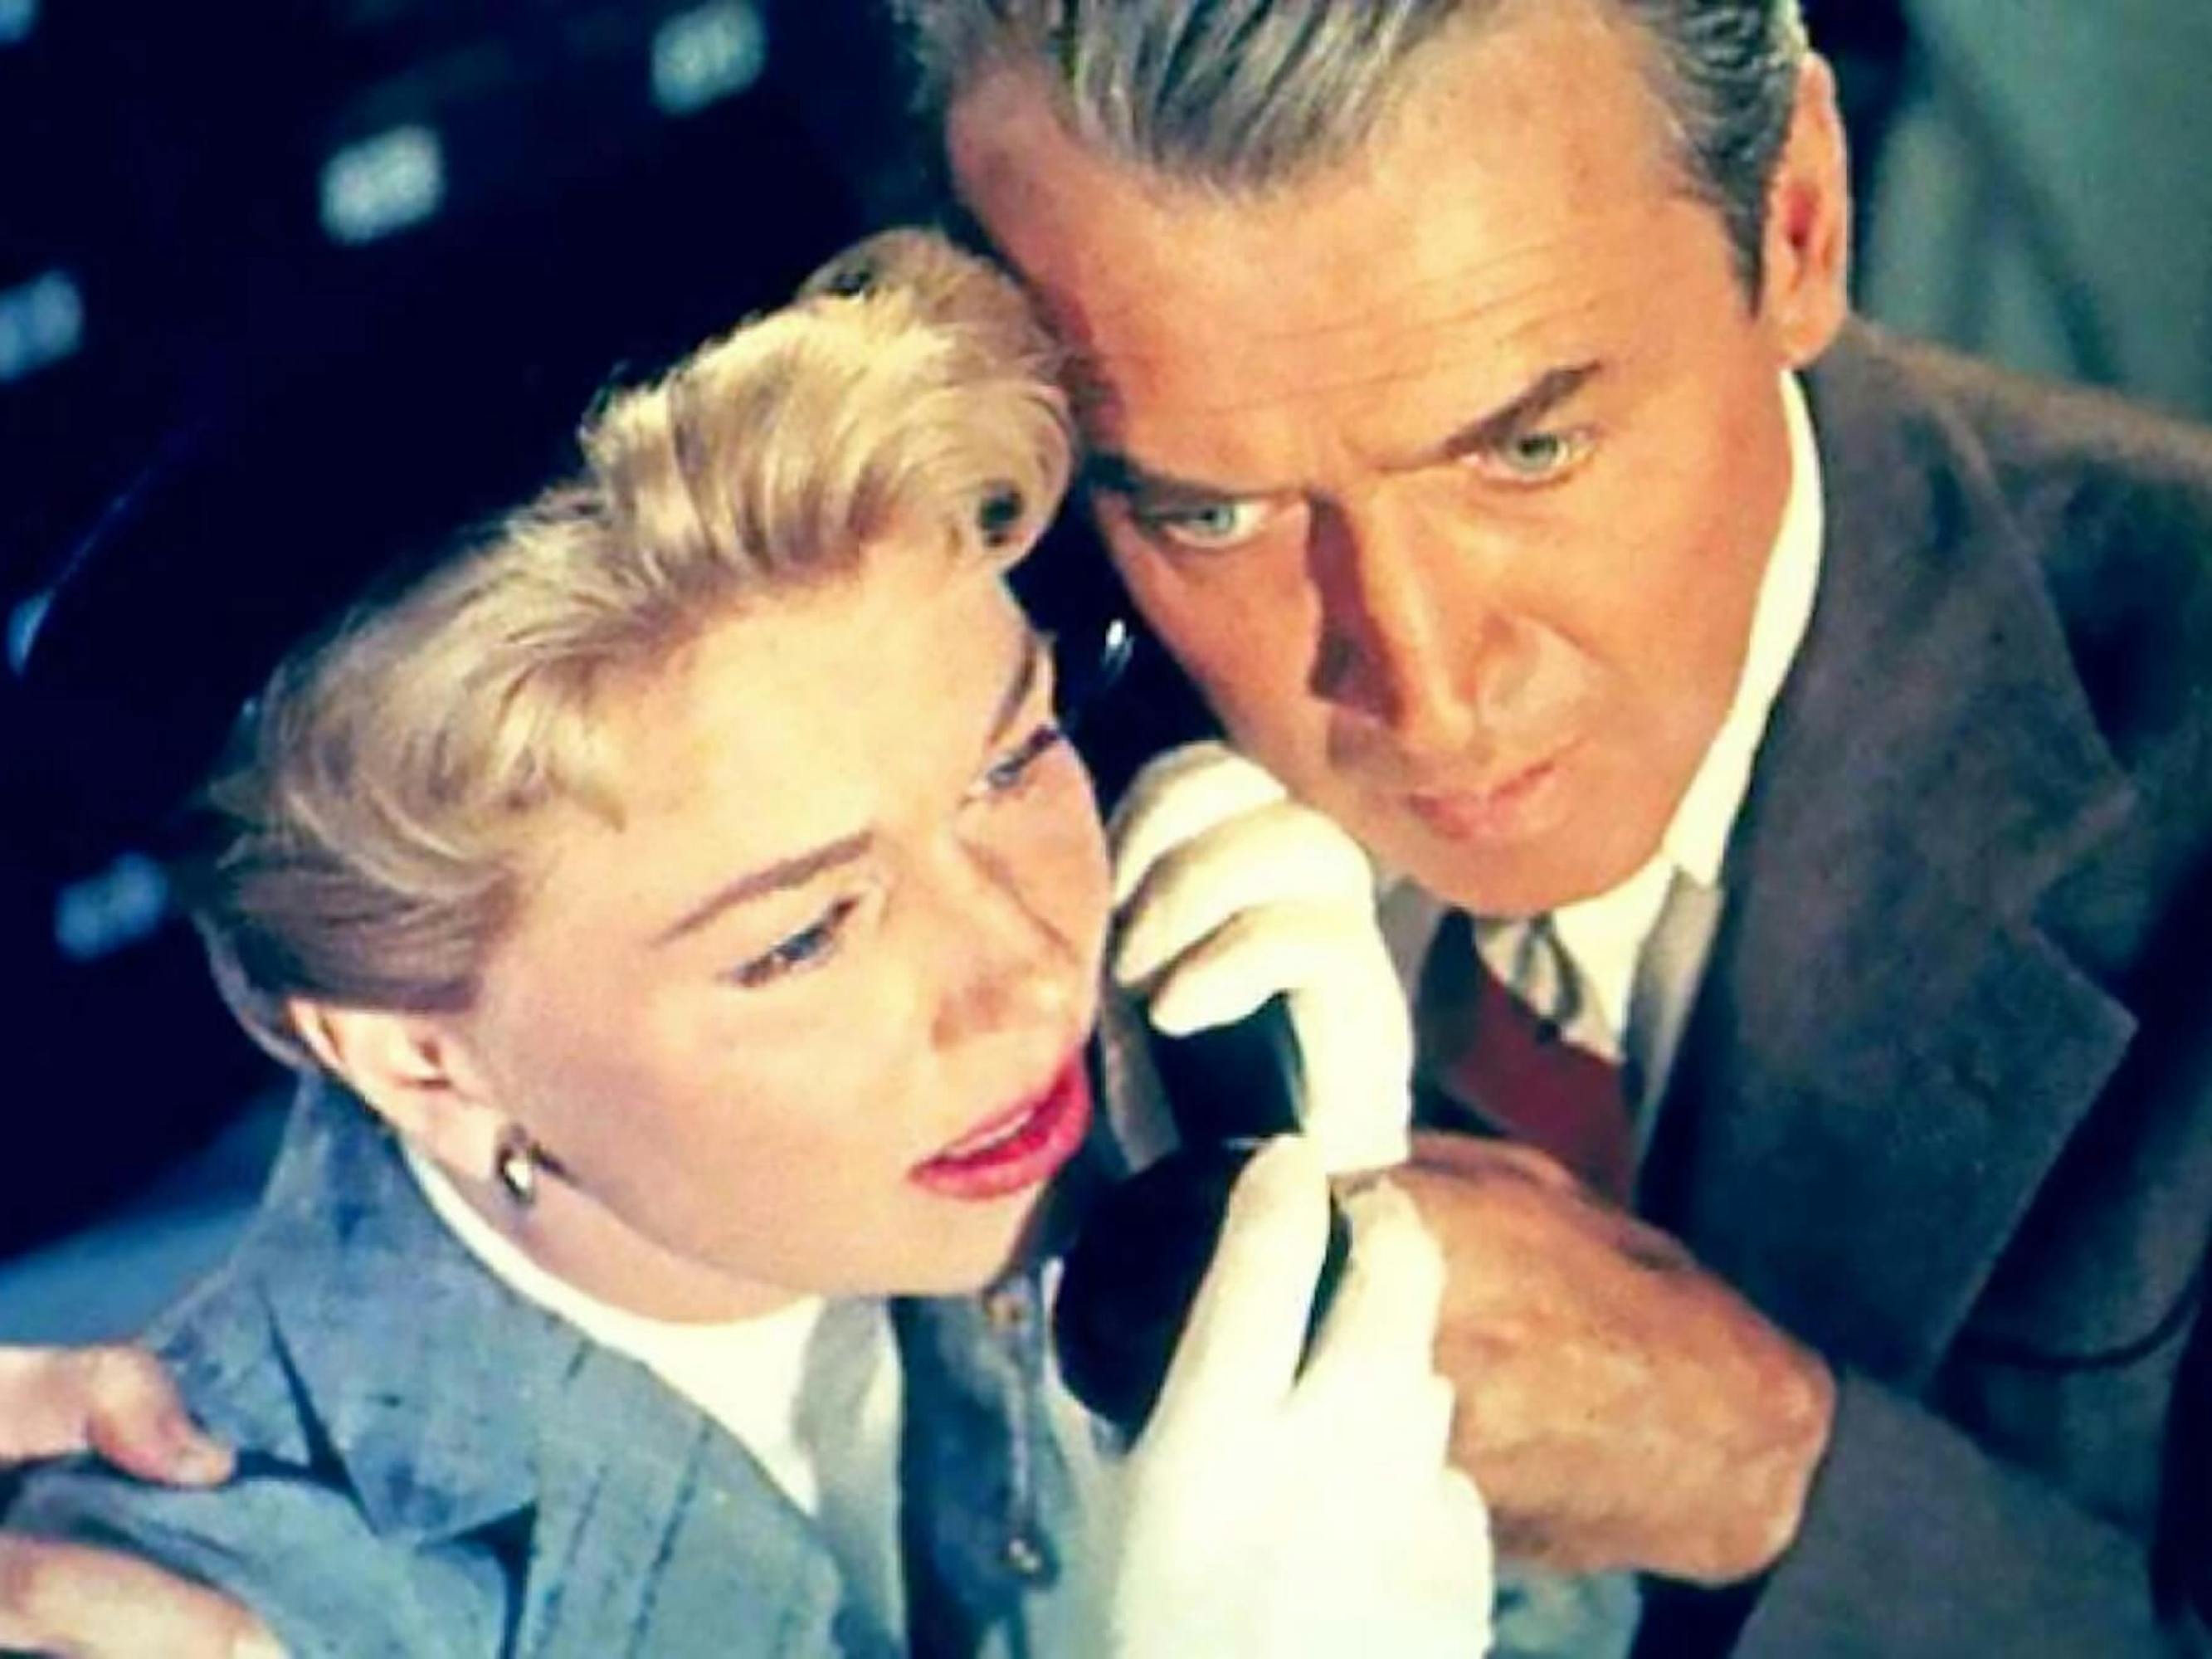 Josephine Conway McKenna (Doris Day) and Dr. Benjamin McKenna (James Stewart) in The Man Who Knew Too Much. They clutch a phone between them. Day wears white gloves and a black beret, and Stewart wears a dark suit.